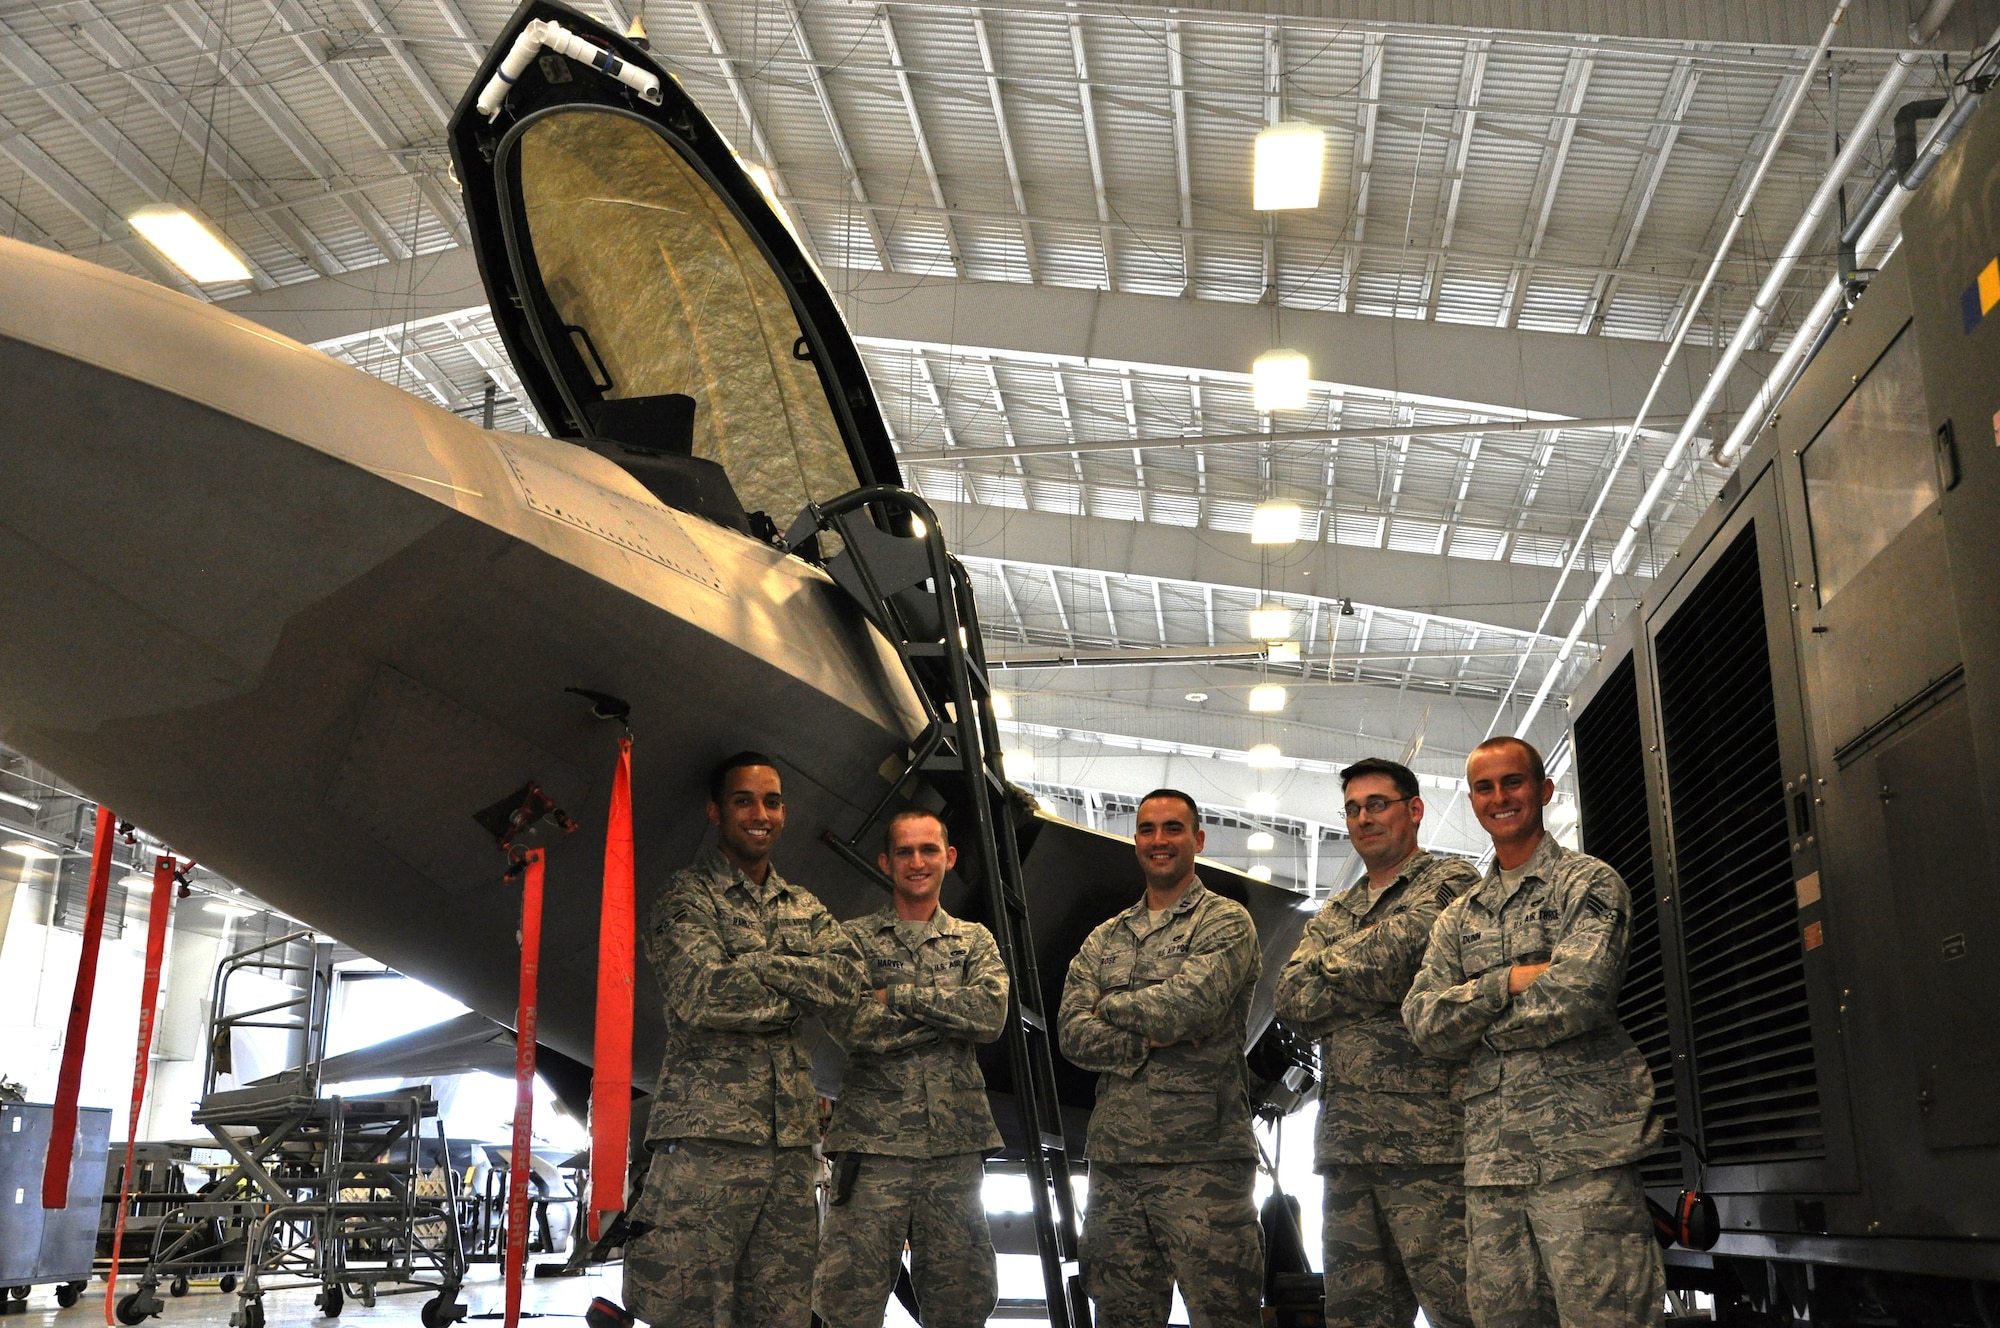 Capt. Stephen Rose, 43rd Aircraft Maintenance Unit officer in charge; Tech. Sgt. Kraig Callais, 43rd AMU avionics fleet health manager; Senior Airman Christopher Dunn, 43rd AMU F-22 specialist; Airman 1st Class Kenan Harvey, 43rd AMU F-22 specialist; and Airman 1st Class Daniel Ramize, 43rd AMU F-22 specialist, pose in front of an F-22 Raptor that they are currently working on inside the hangar of the 43rd AMU at Tyndall Air Force Base. The Avionics Health of the Fleet program was implemented to increase the number of fully mission capable F-22s on Tyndall’s flight line. (U.S. Air Force photo by Airman 1st Class Alex Echols)